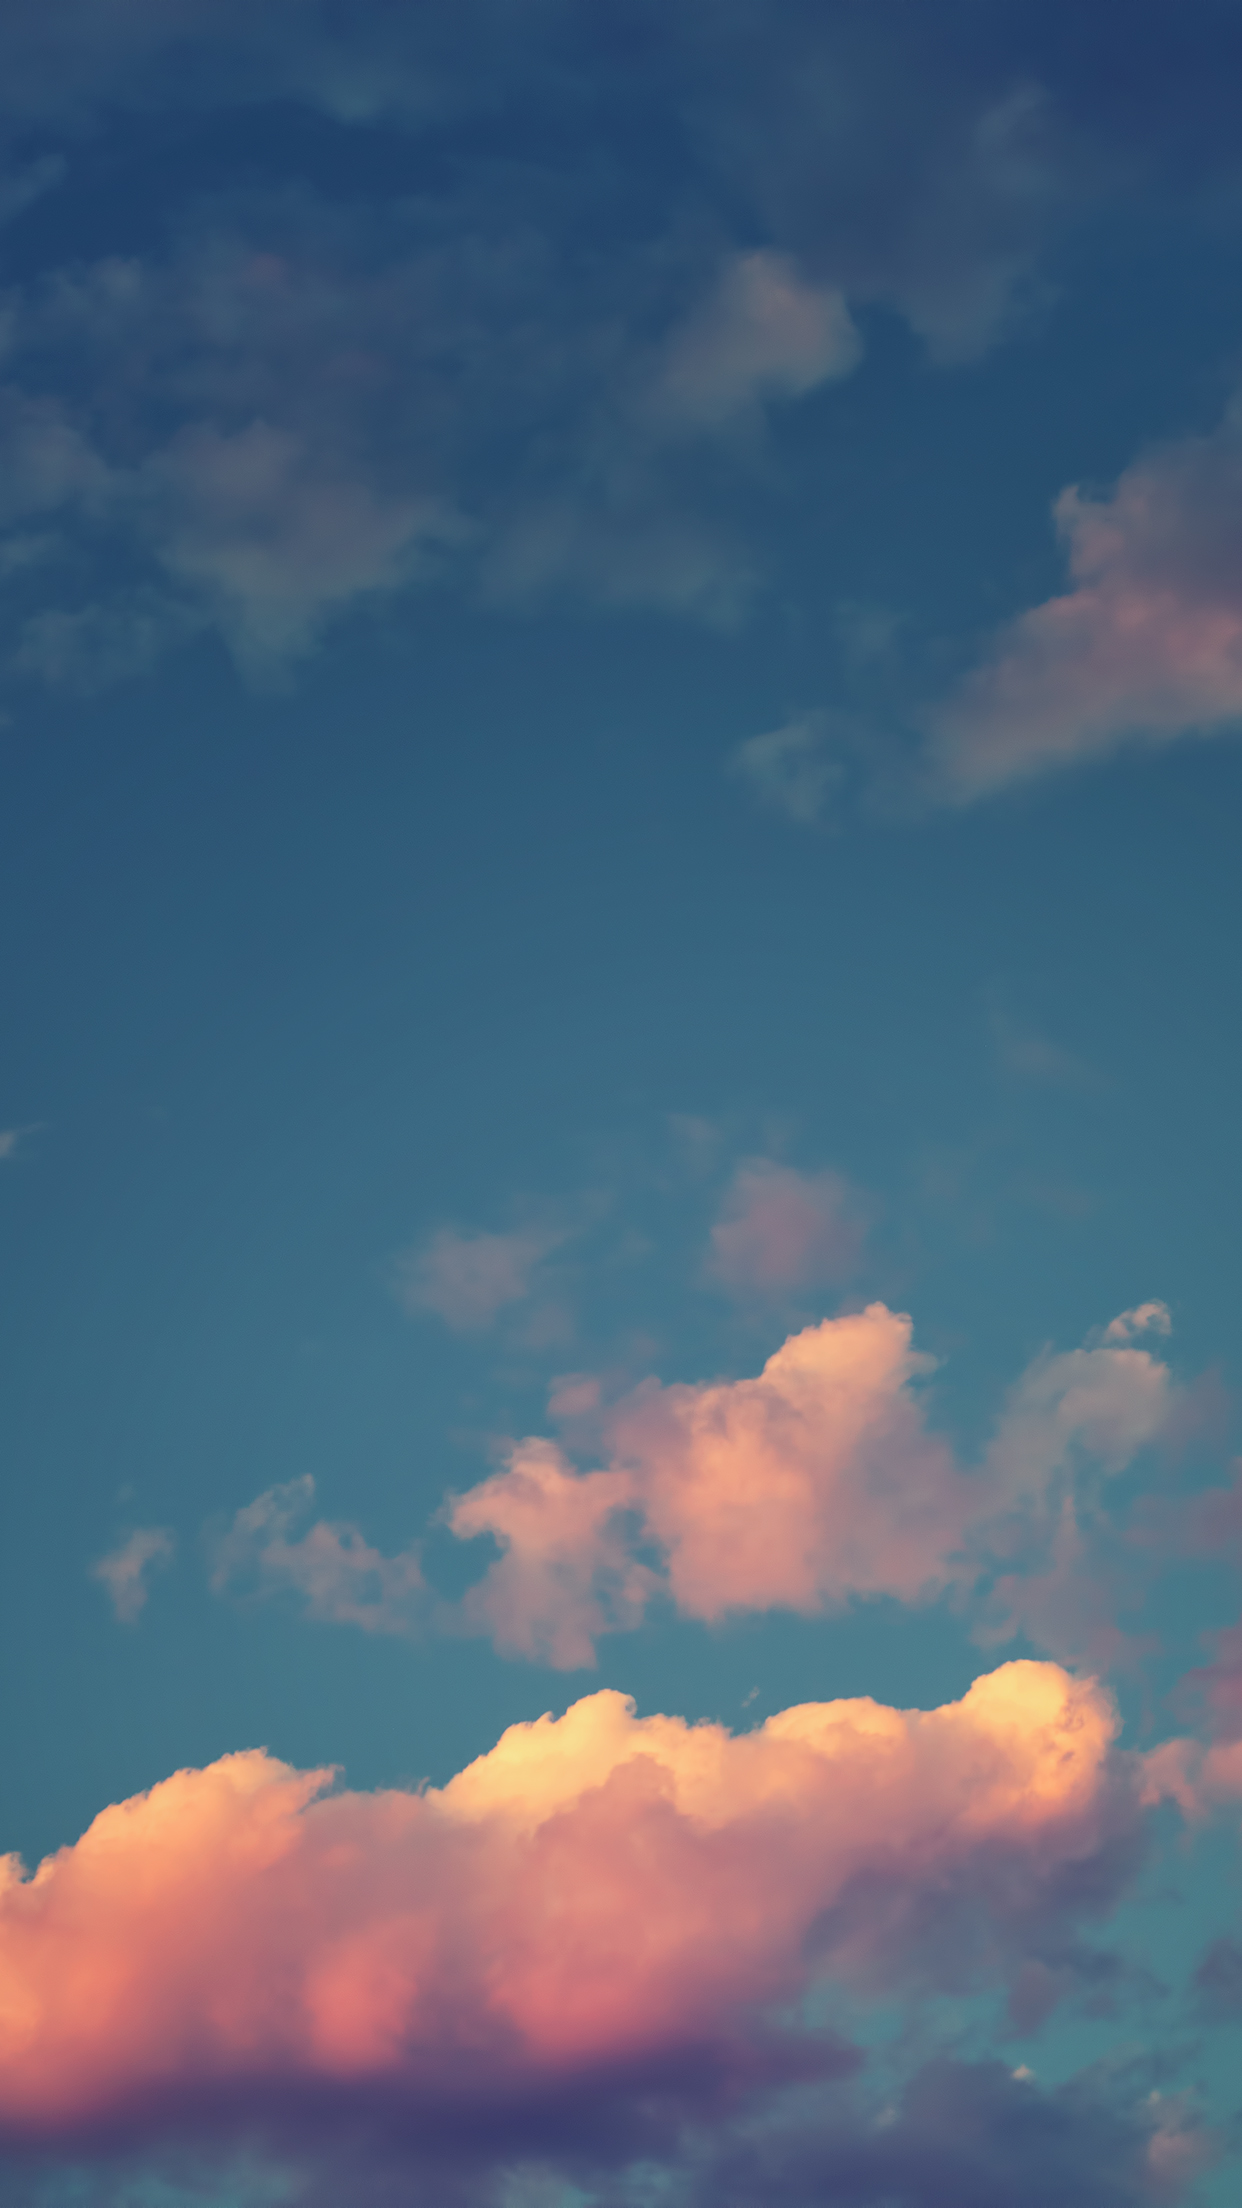 Sunset and clouds wallpapers for iPhone 6 and iPhone 6 Plus 1242x2208